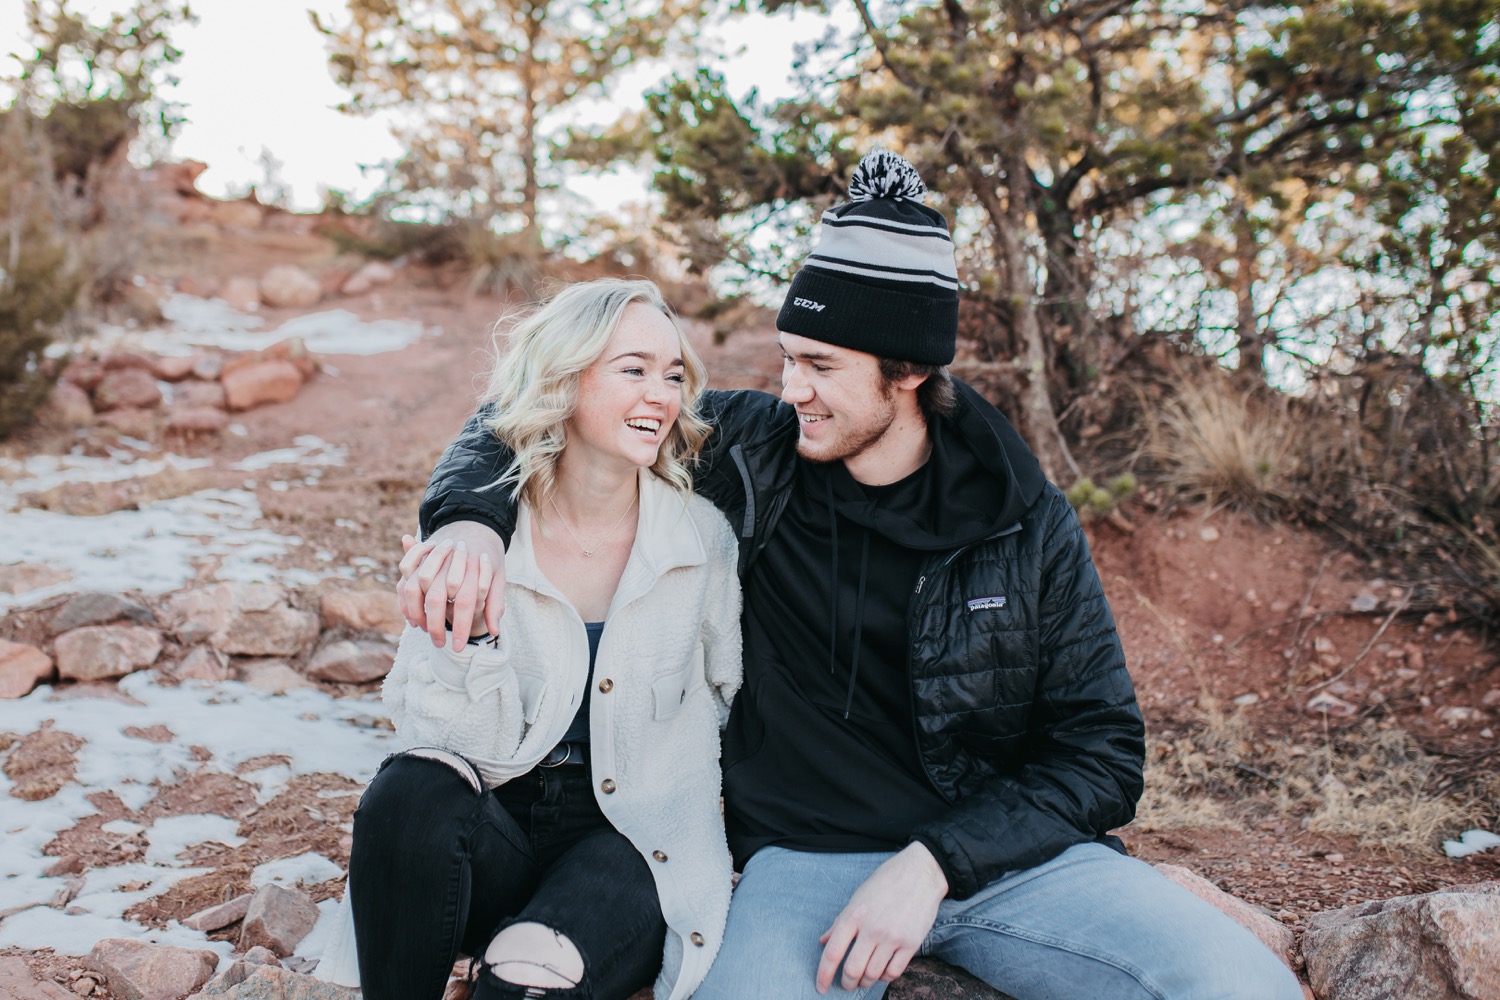 A photographer's guide to posing couples | Unscripted Photographers